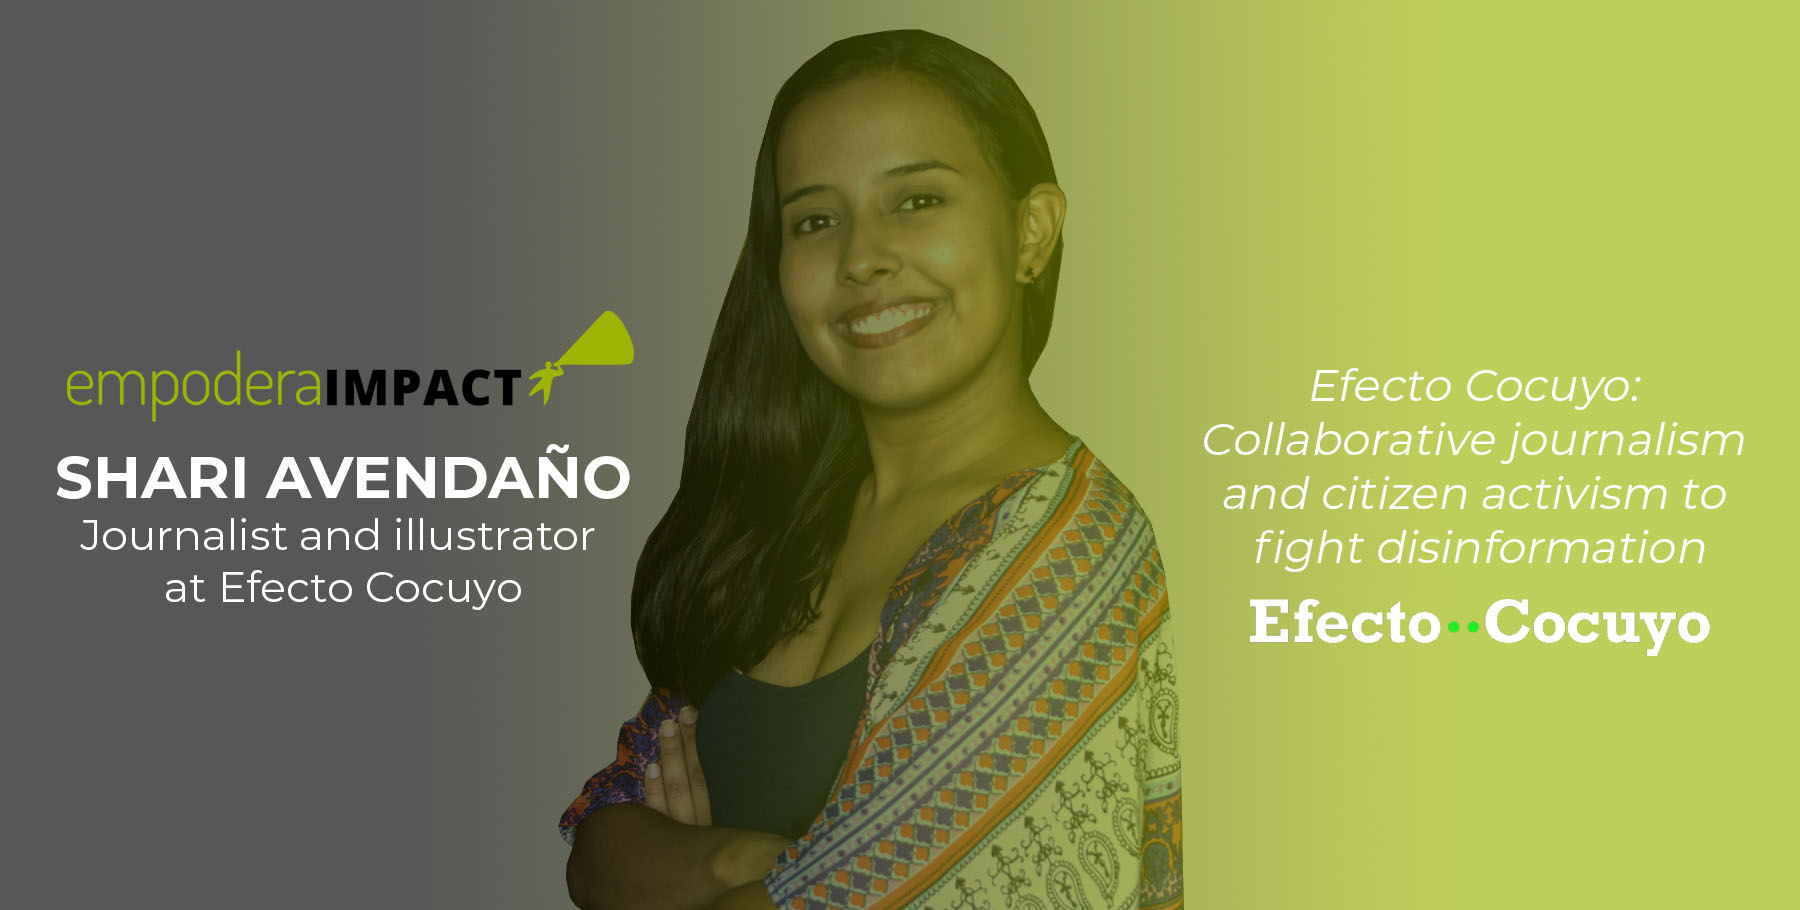 Efecto Cocuyo: Collaborative journalism and citizen activism against disinformation